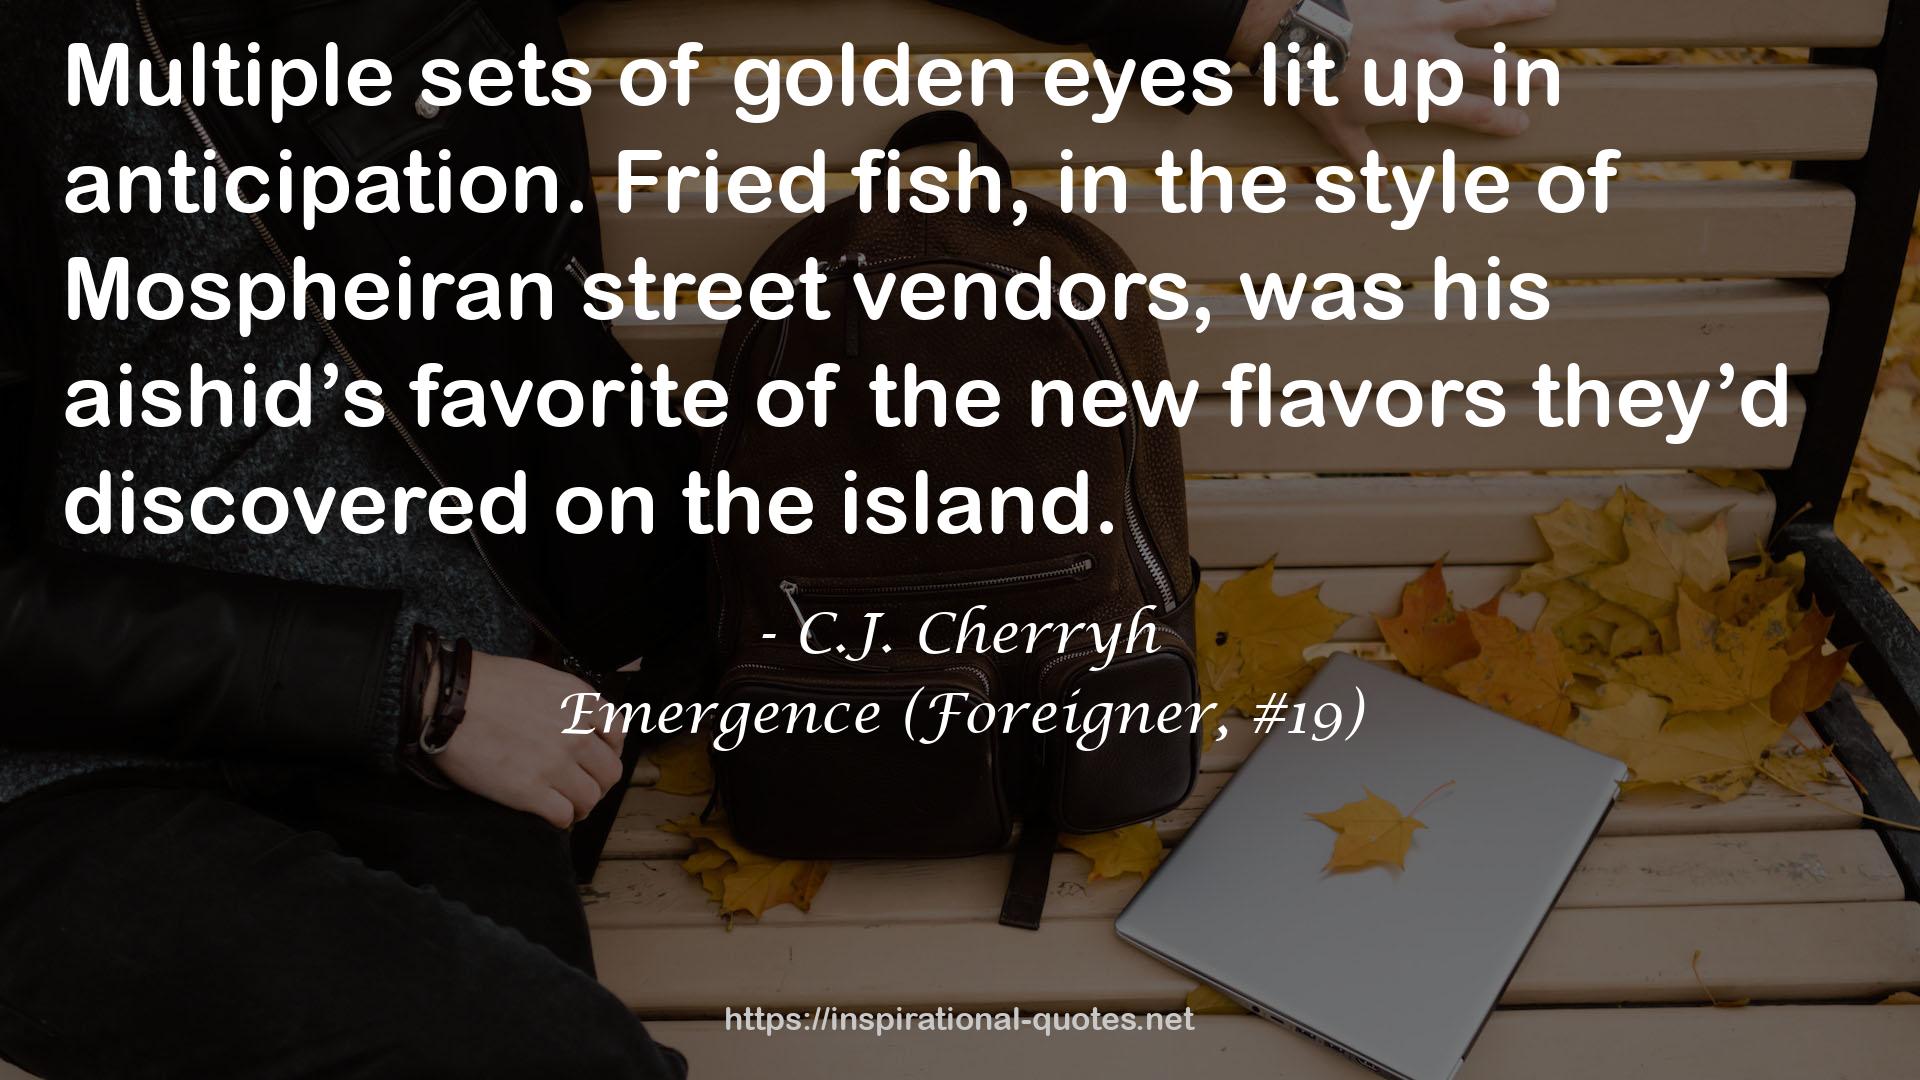 Emergence (Foreigner, #19) QUOTES